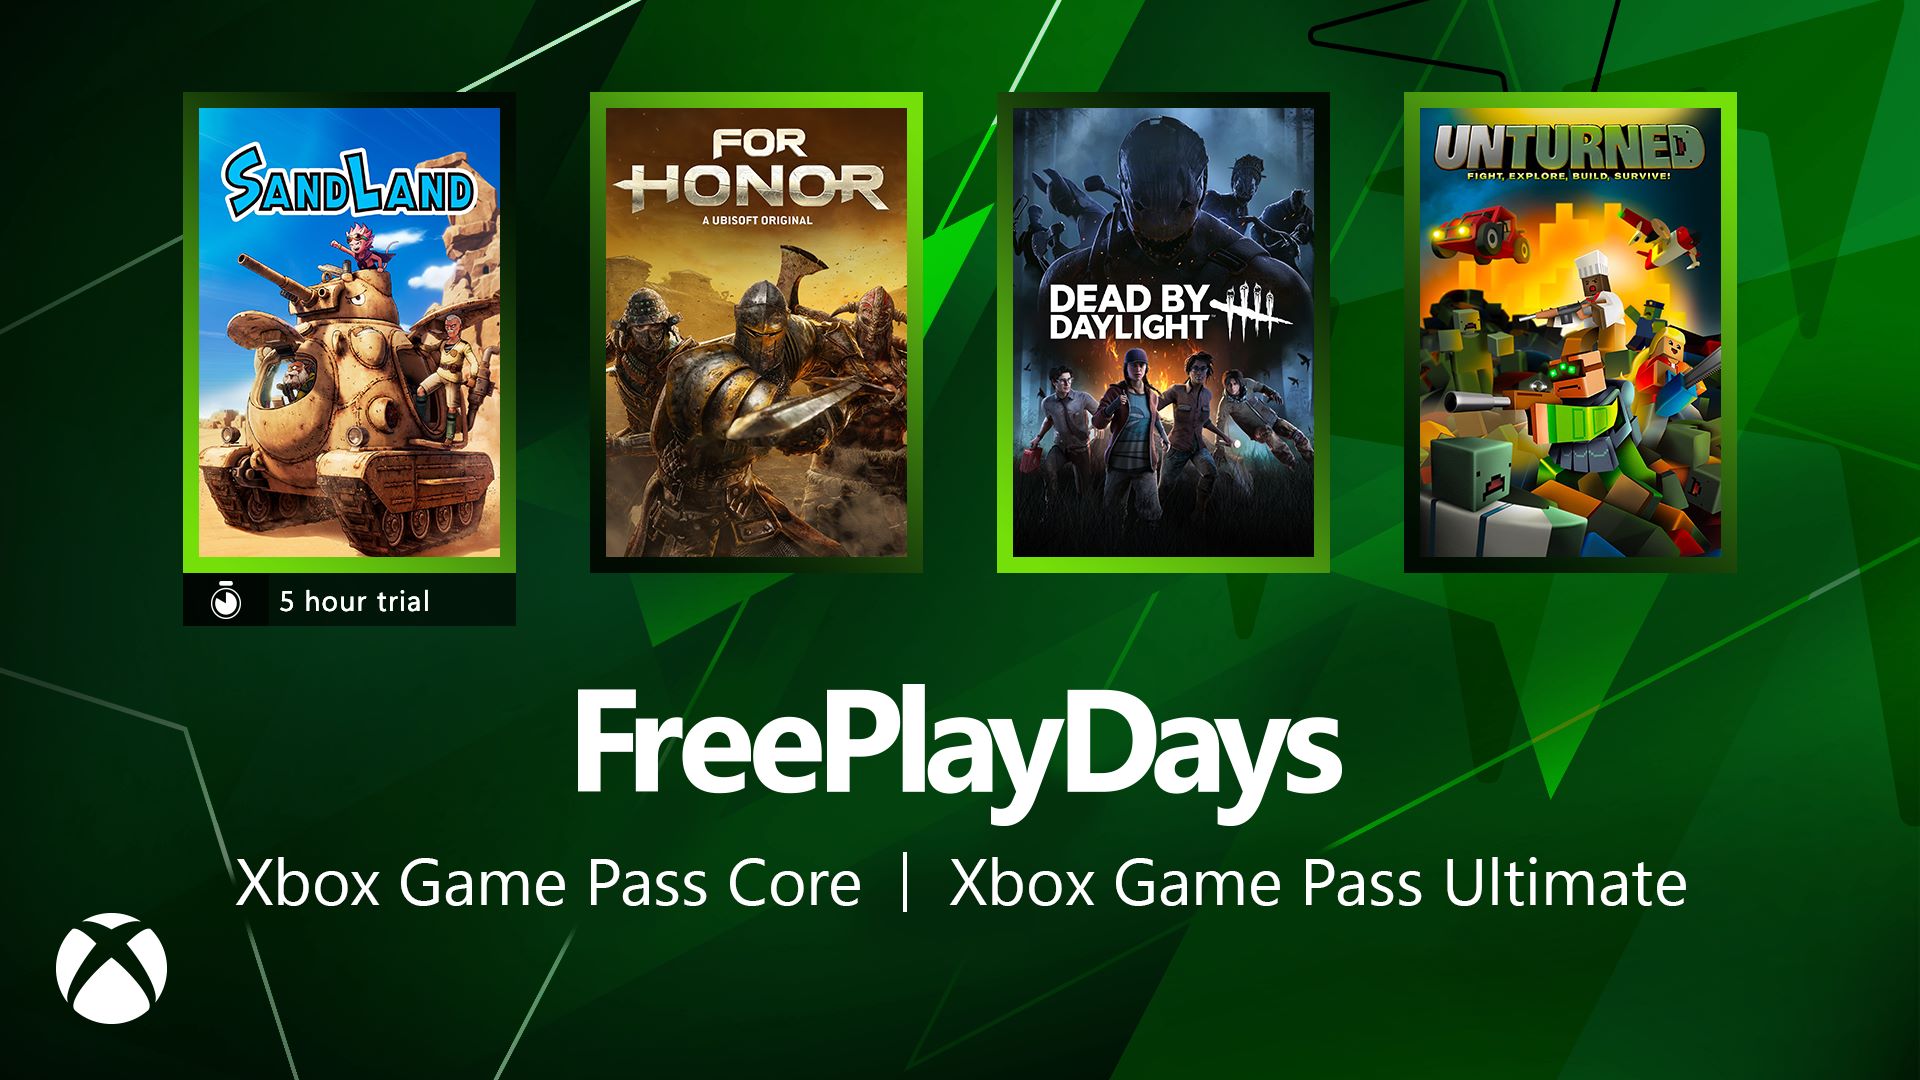 Free Play Days – Sand Land, For Honor, Dead by Daylight and Unturned